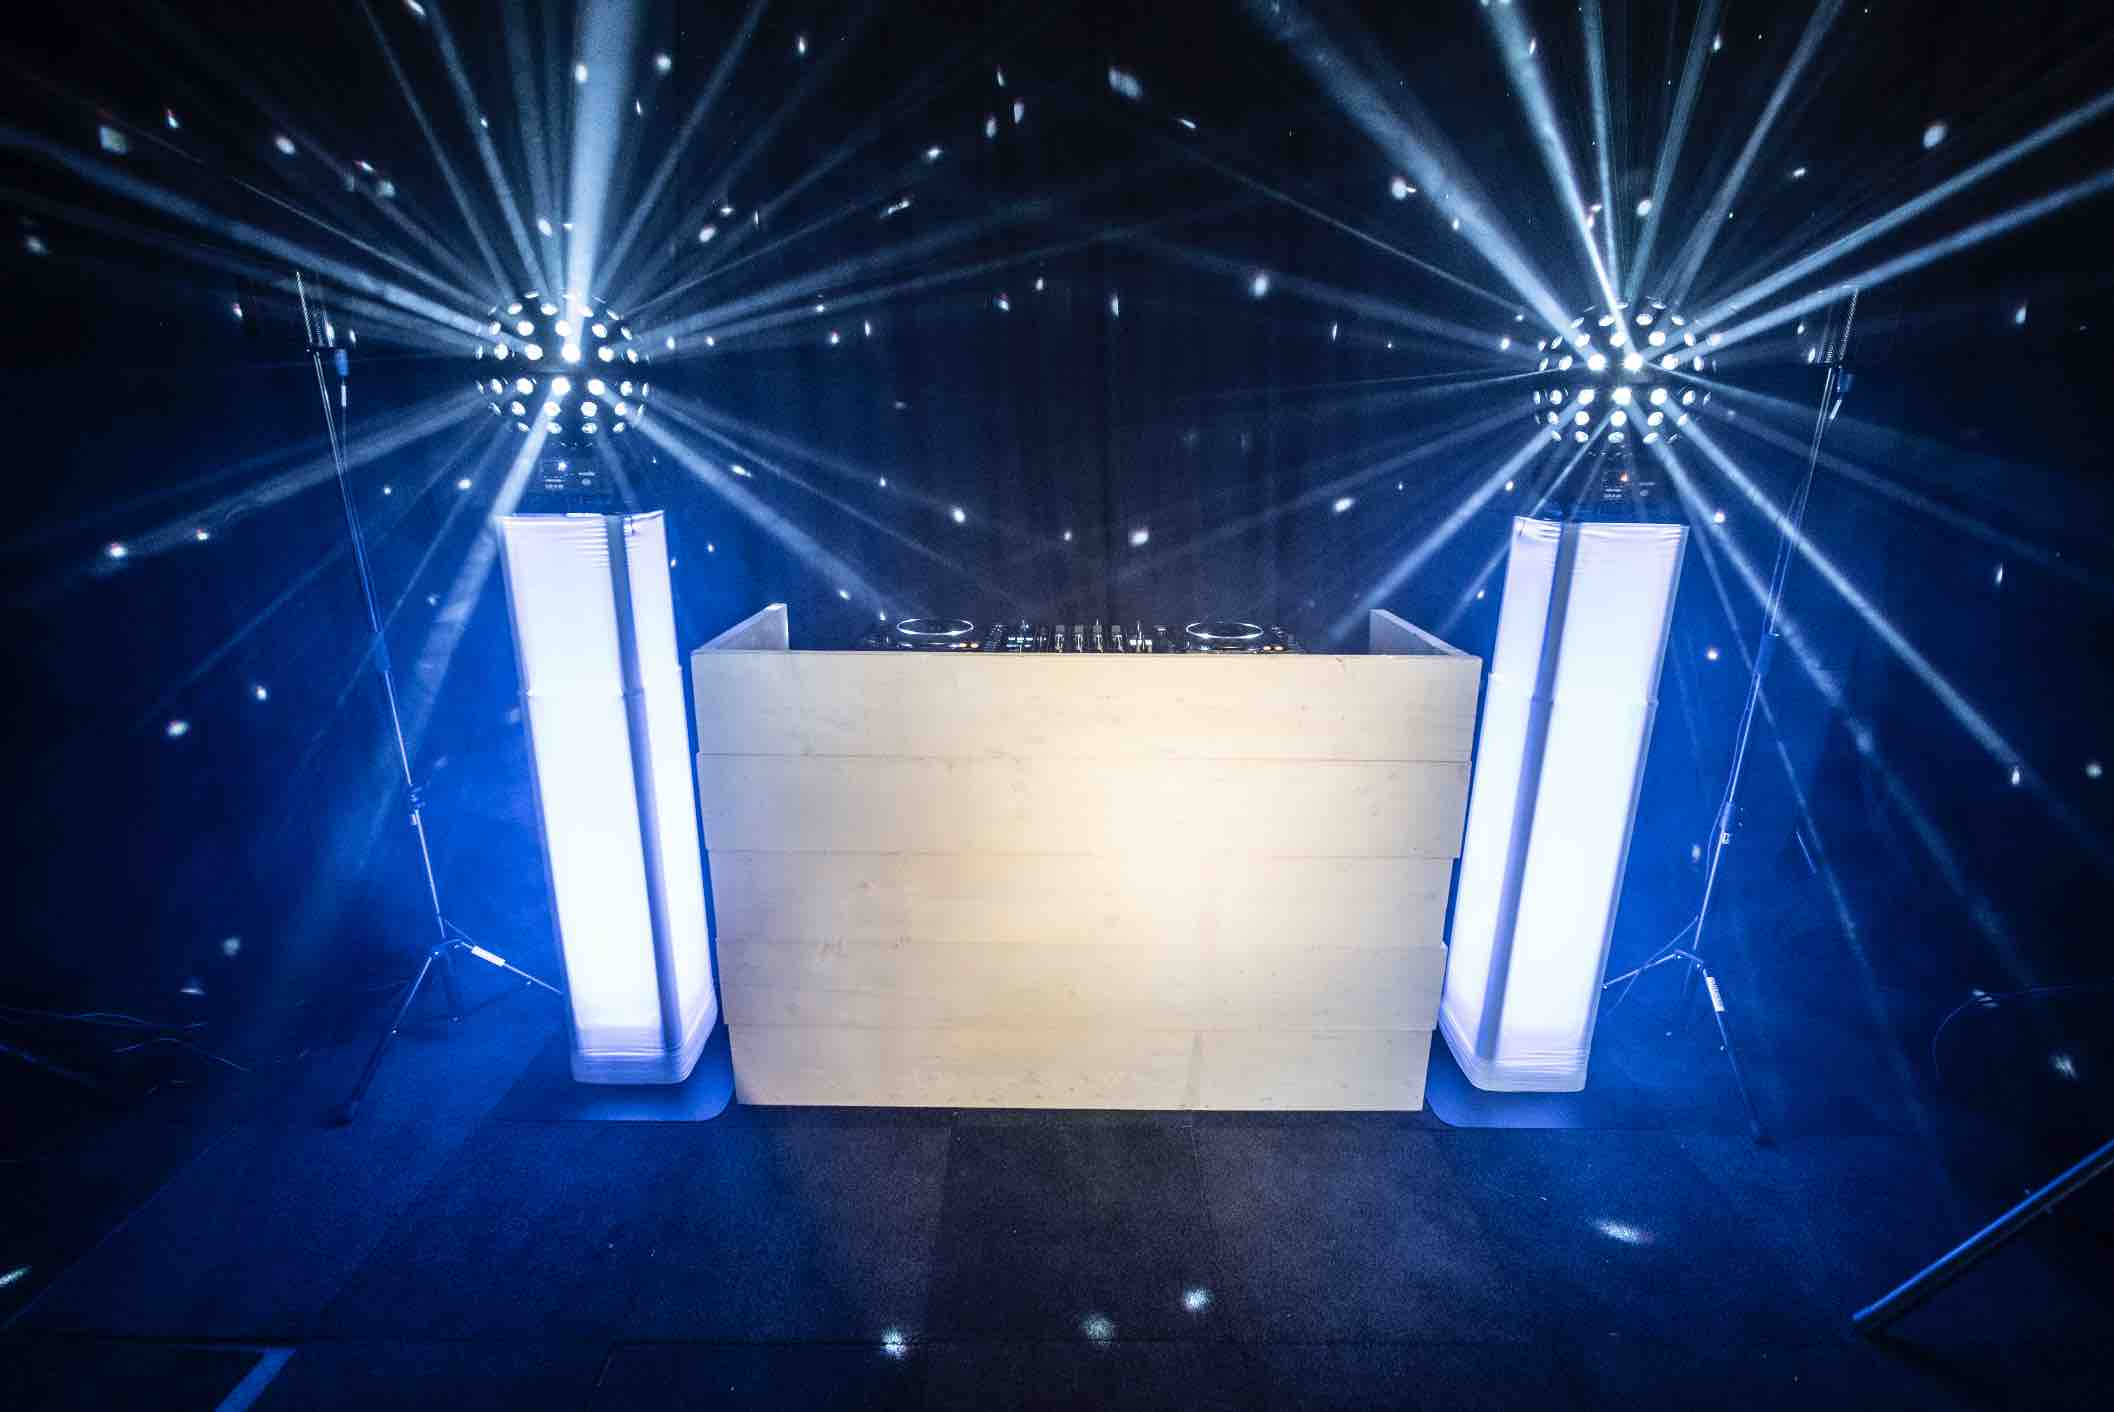 DJ show with white scaffolding wooden DJ booth